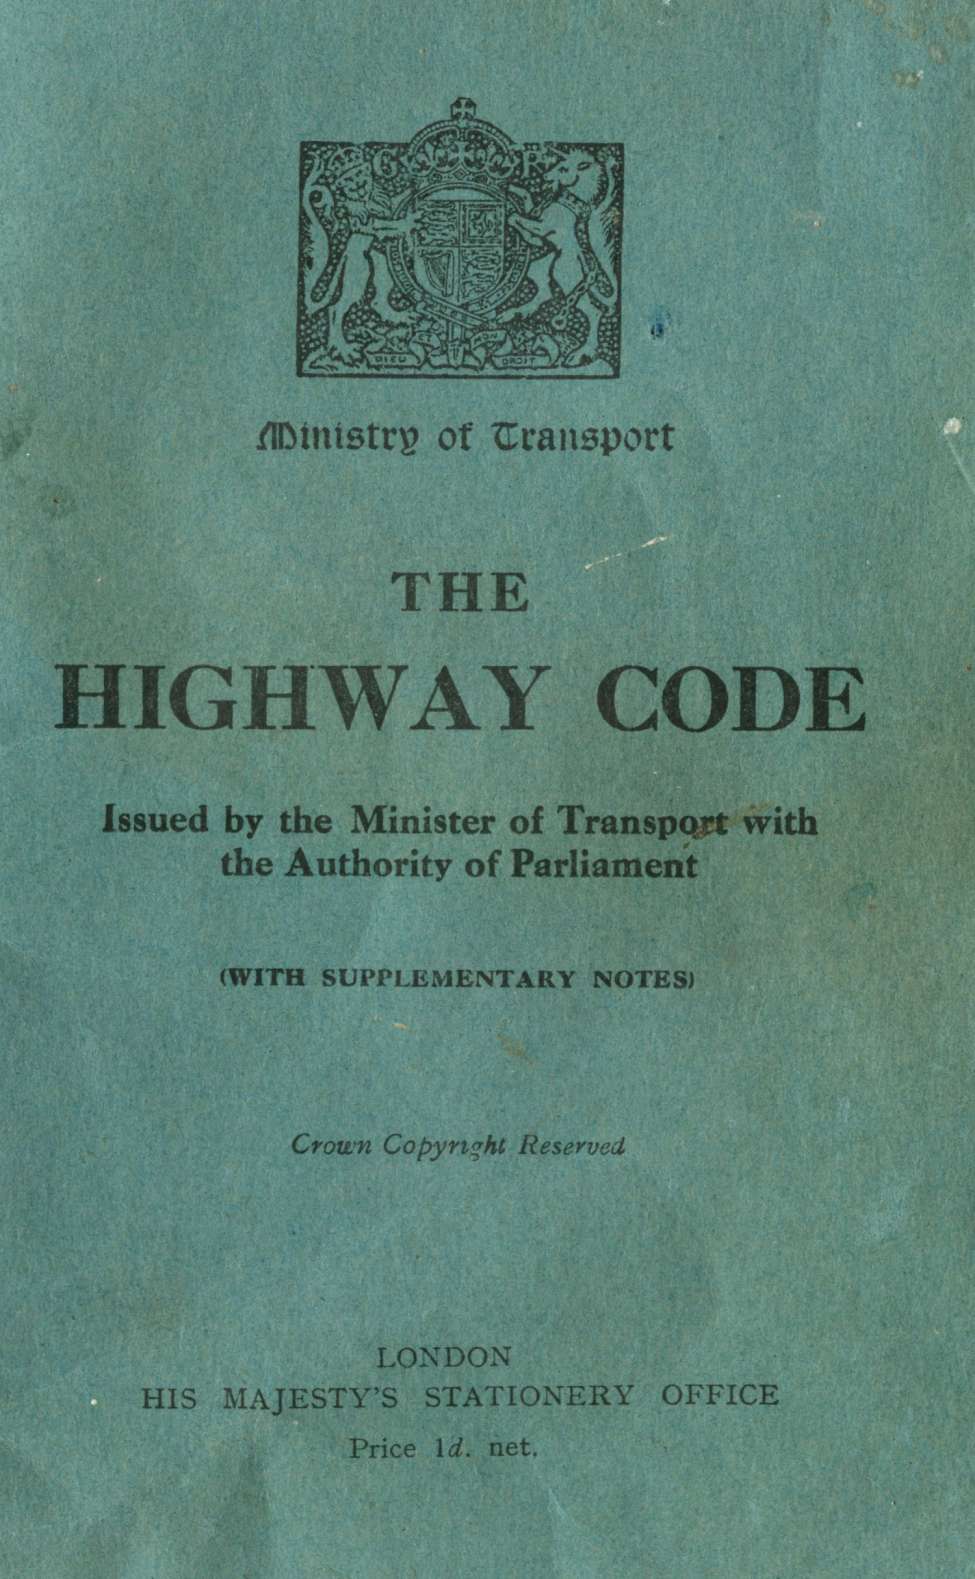 Comic Book Cover For The Highway Code 1935